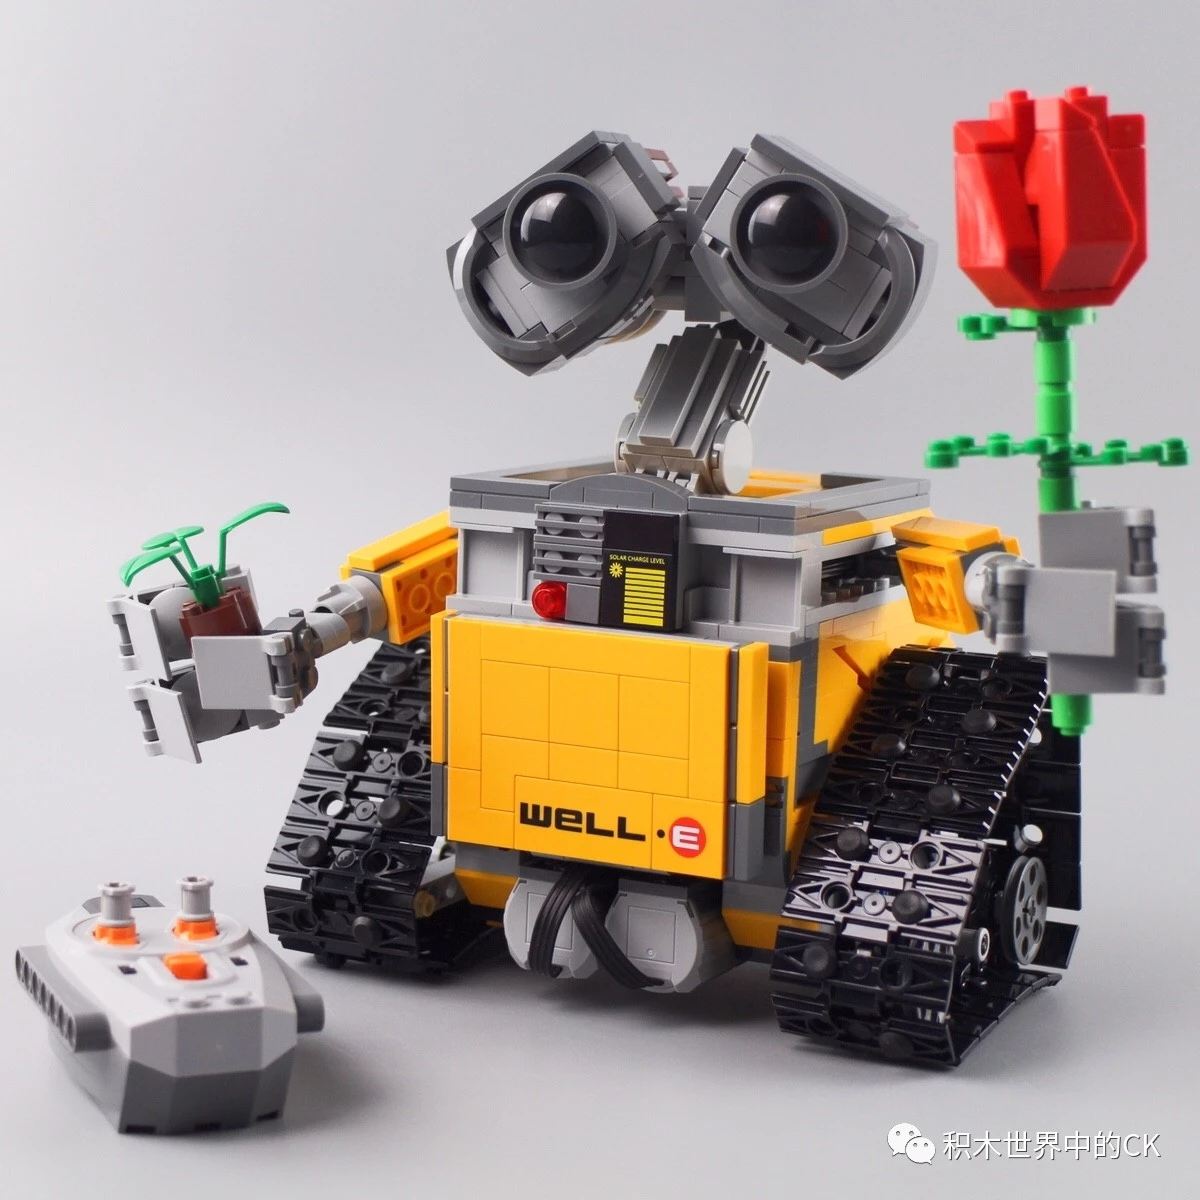 Review of WALL-E Clone of LEGO Ideas 21303 – Customize Minifigures Intelligence